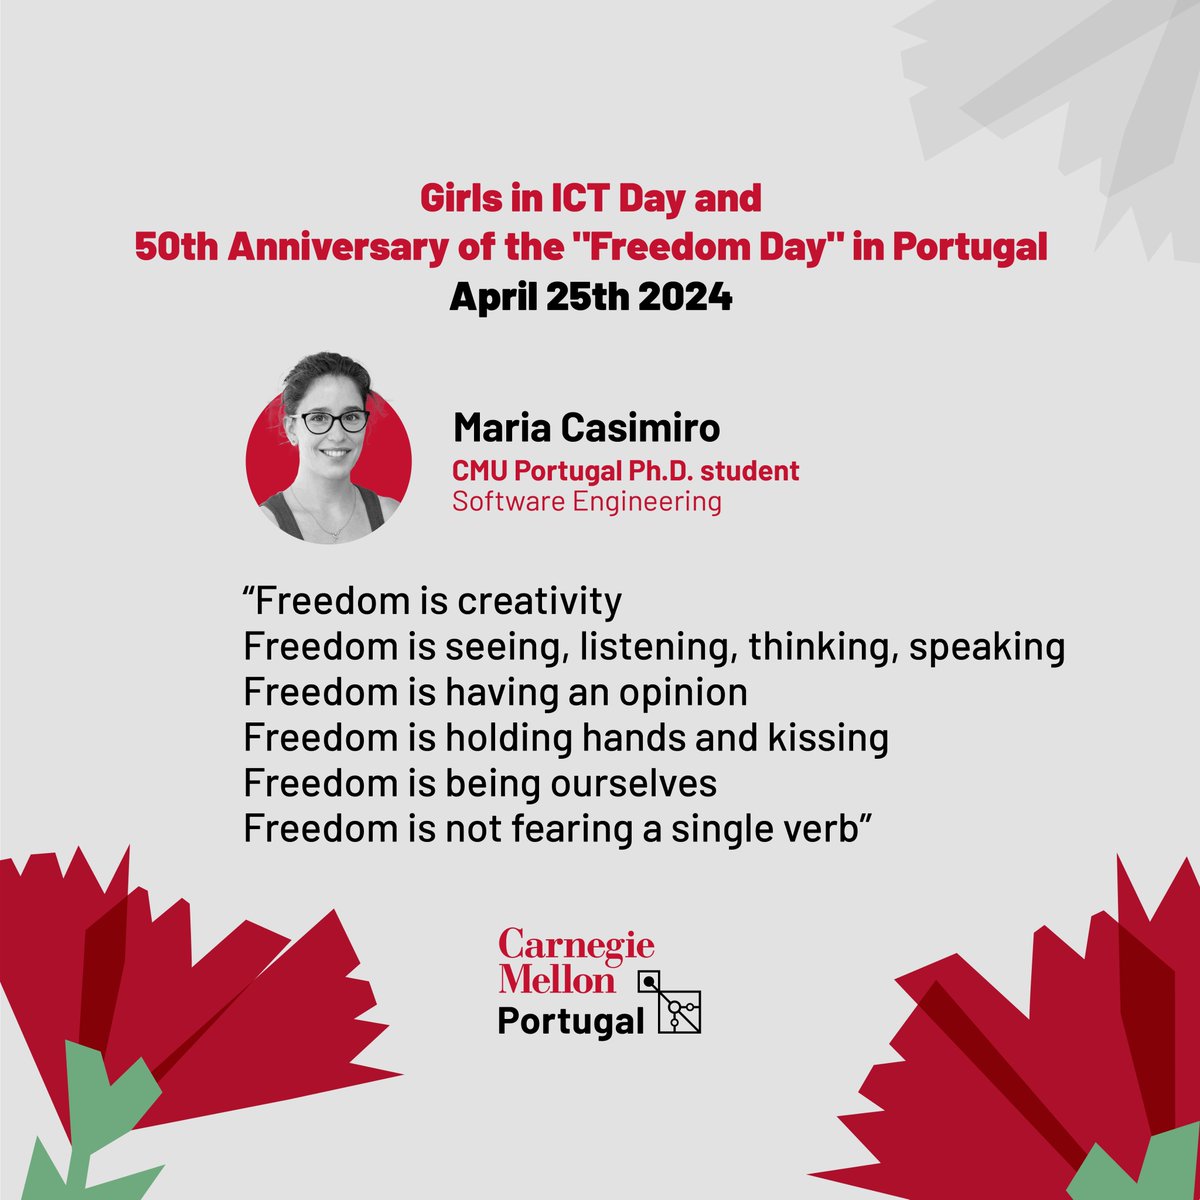 #25deAbril #GirlsInICT #CMUPortugal @S3DatCMU @istecnico